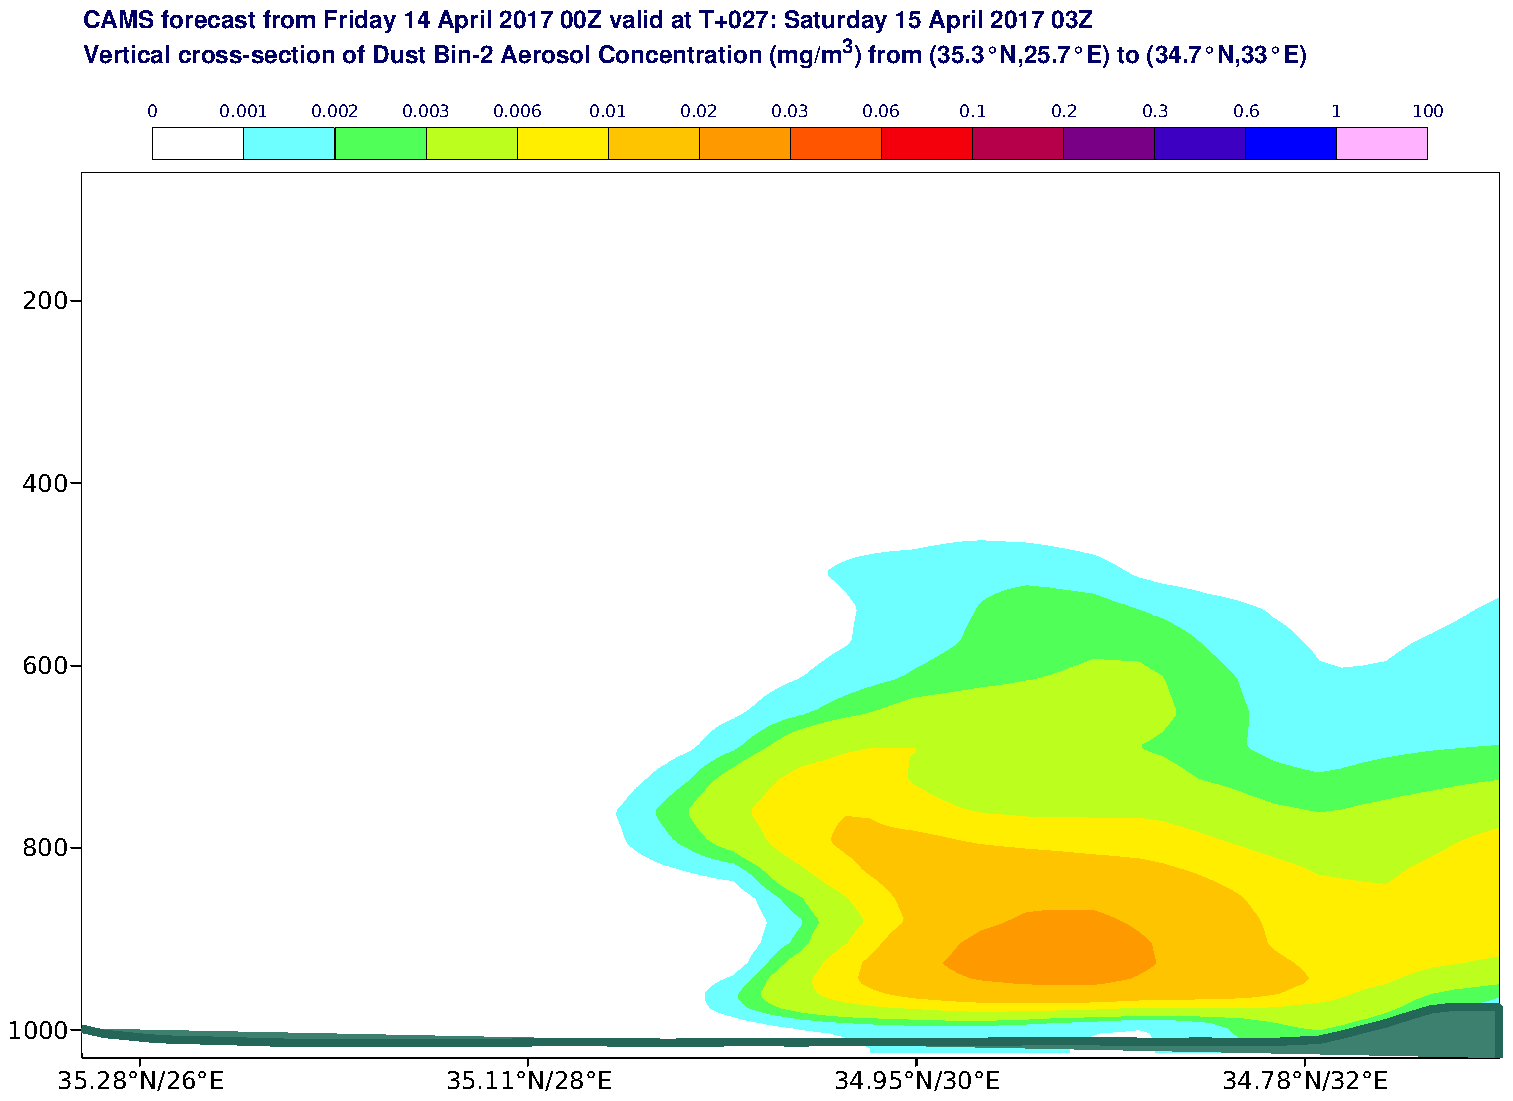 Vertical cross-section of Dust Bin-2 Aerosol Concentration (mg/m3) valid at T27 - 2017-04-15 03:00